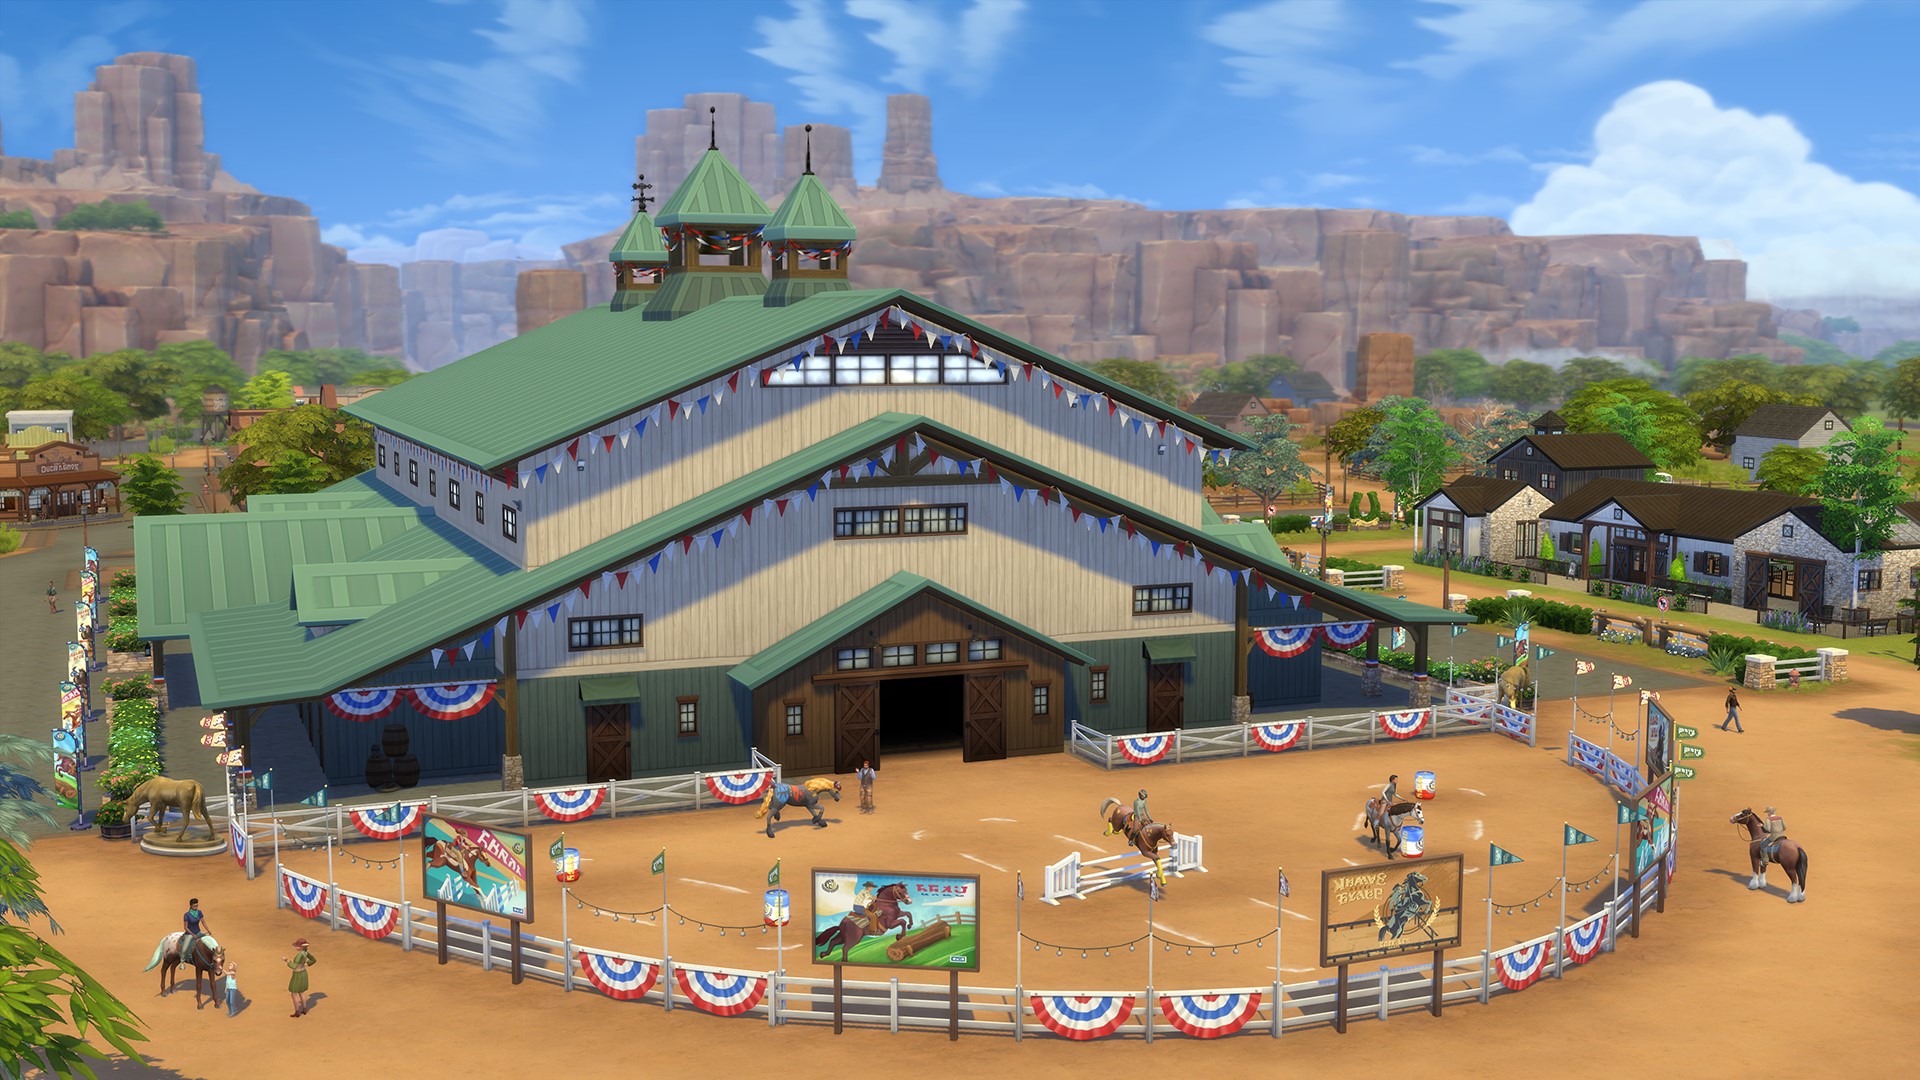 A full shot of the equestrian center in The Sims 4: Horse Ranch. It's a large white building with a green roof and stable doors. A fenced-in riding arena is out front.